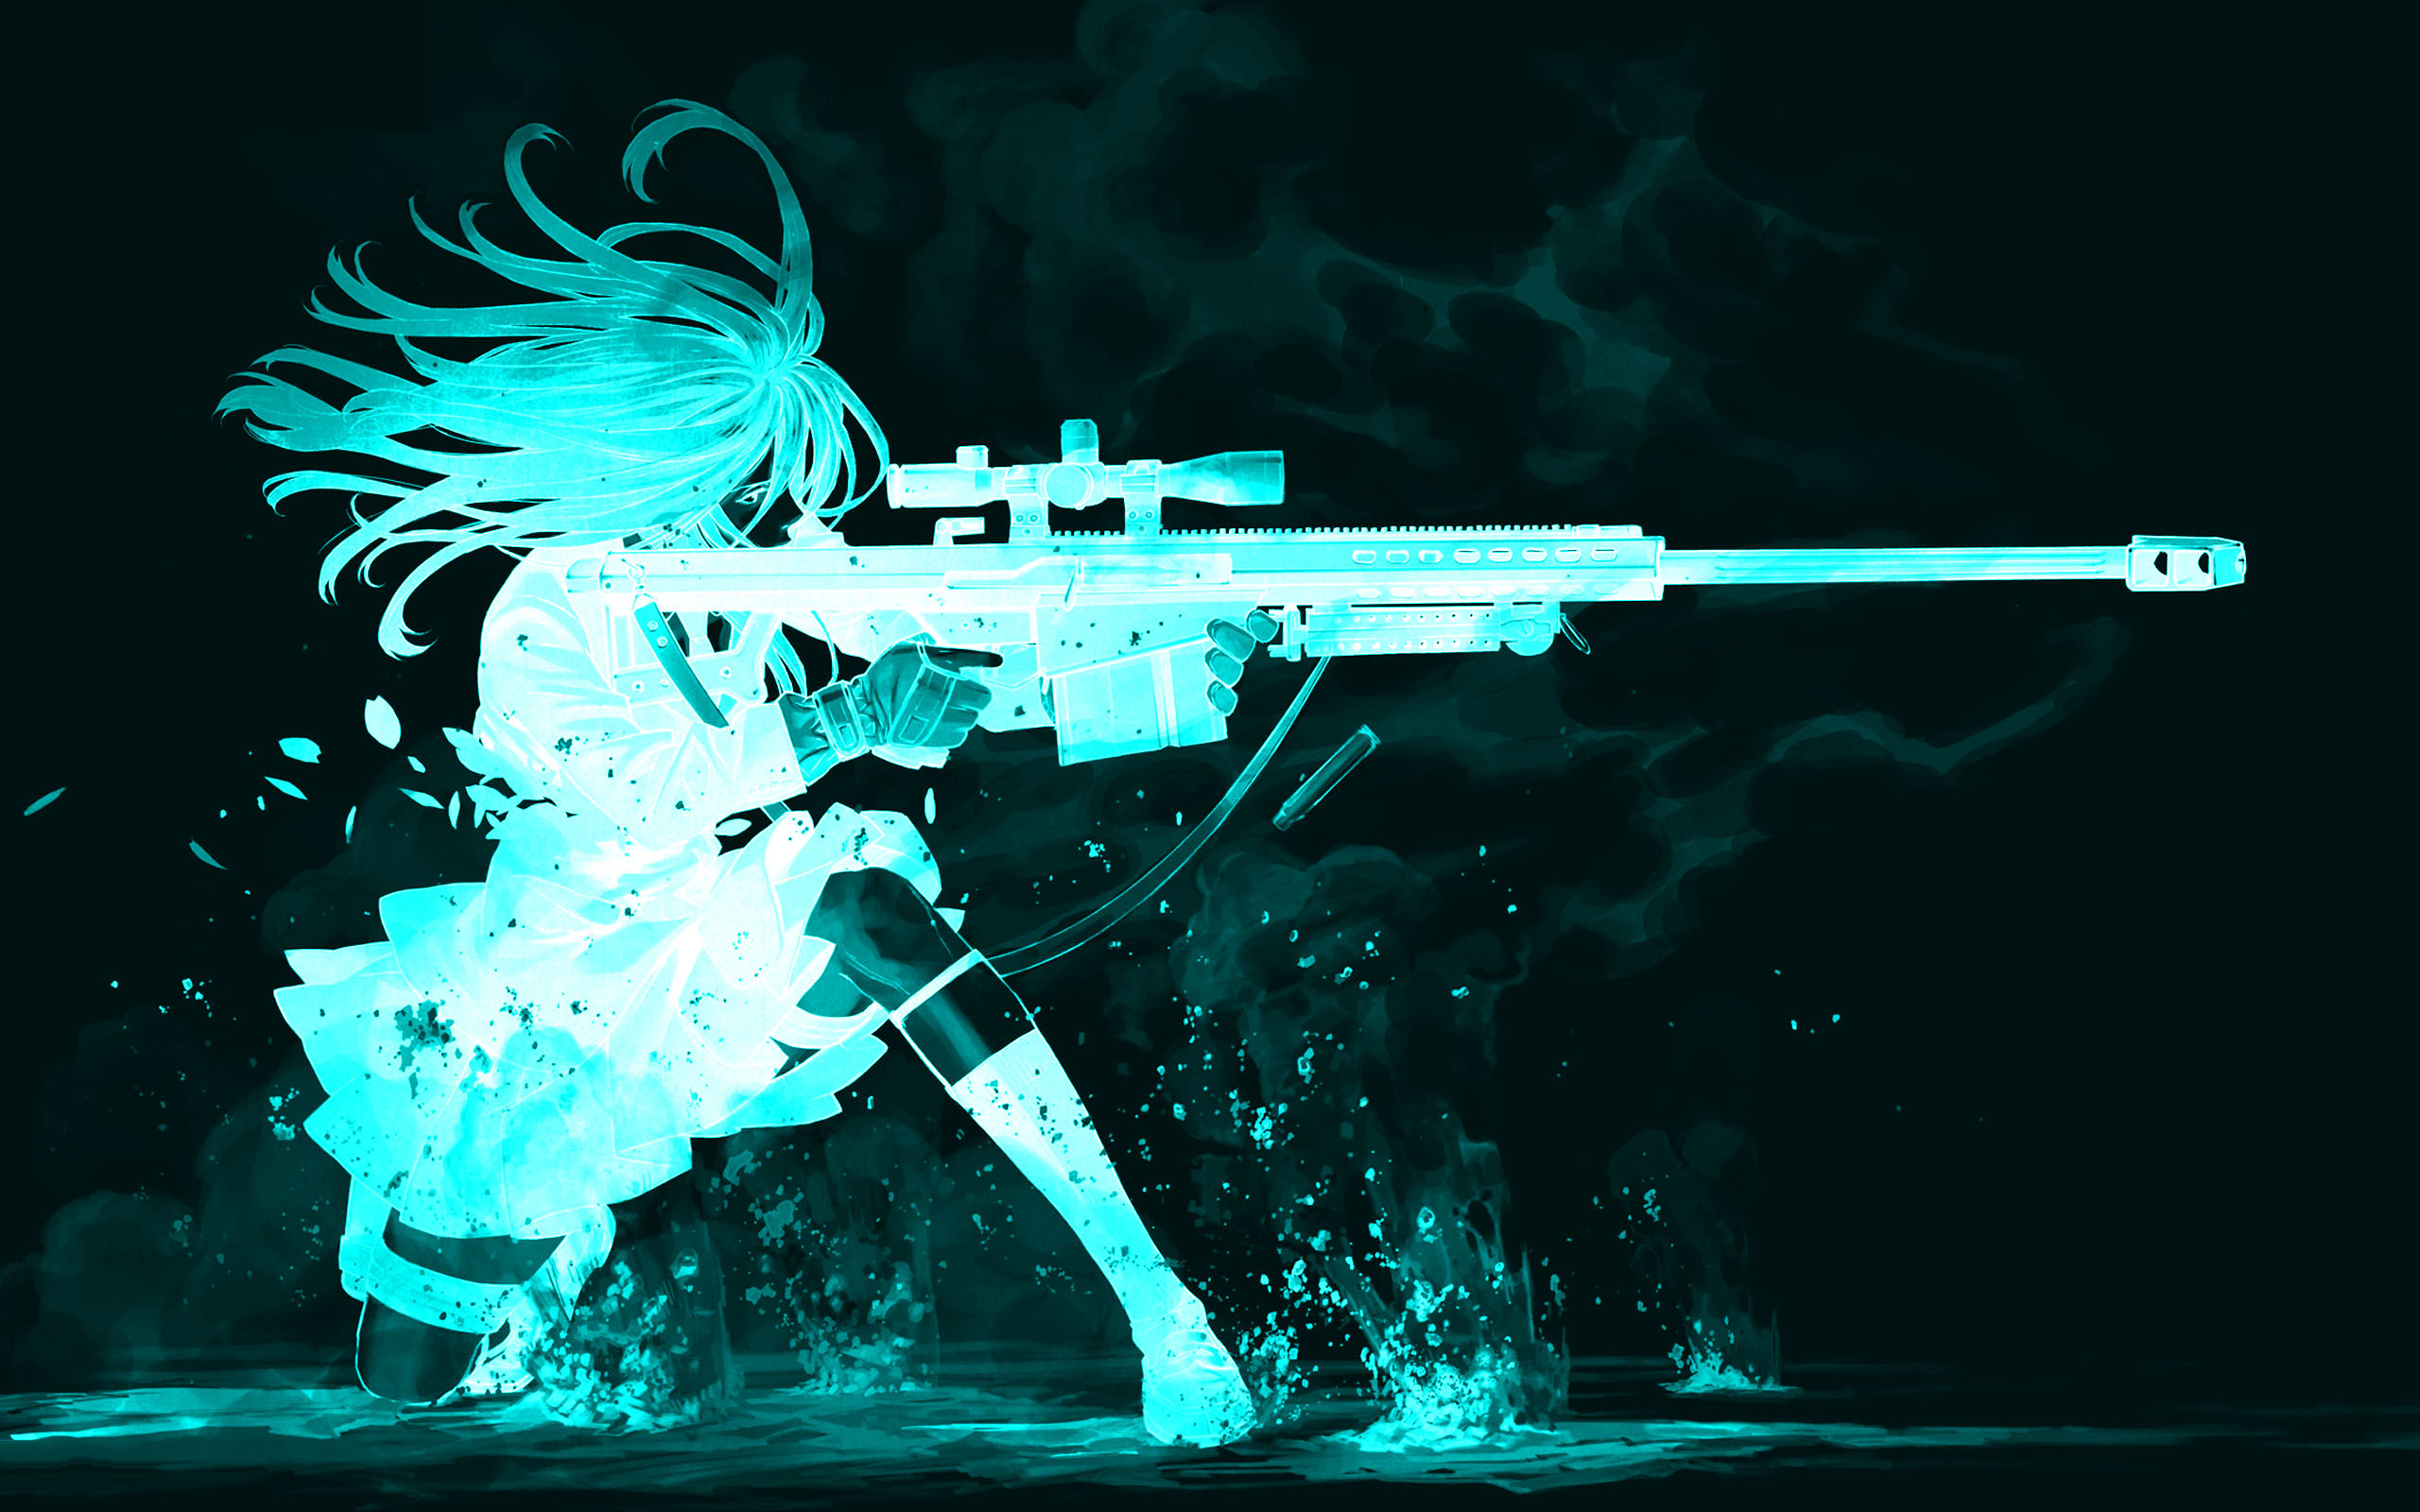 anime wallpapers and backgrounds,gun,laser guns,fictional character,games,shooting